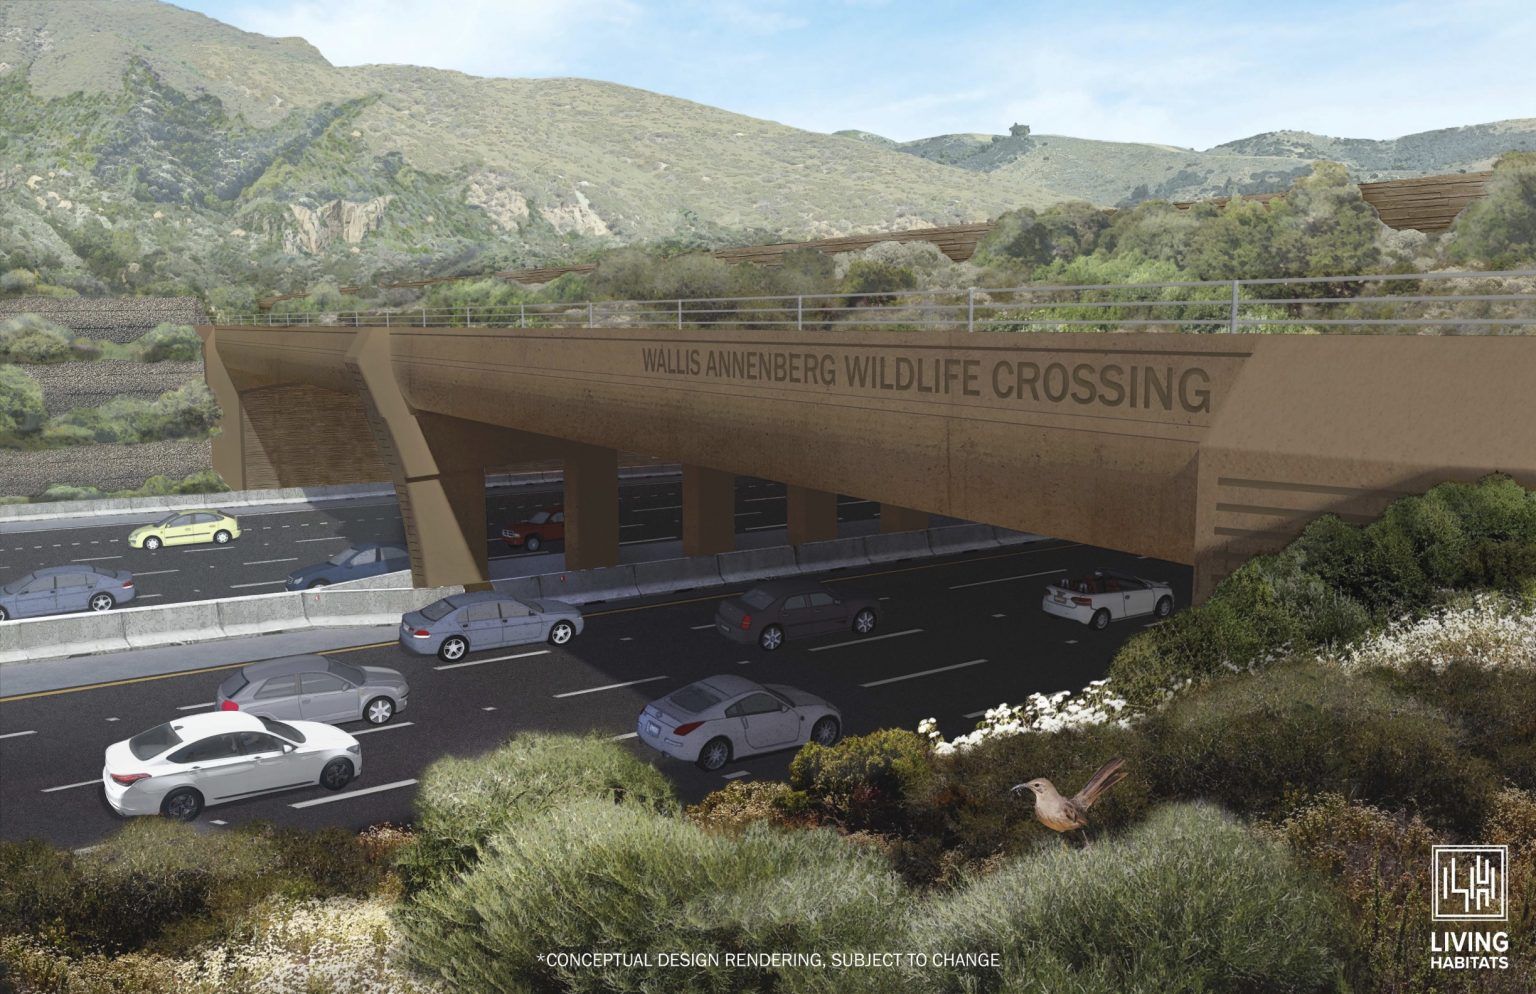 A rendering of a wildlife crossing going over a freeway filled with cars.